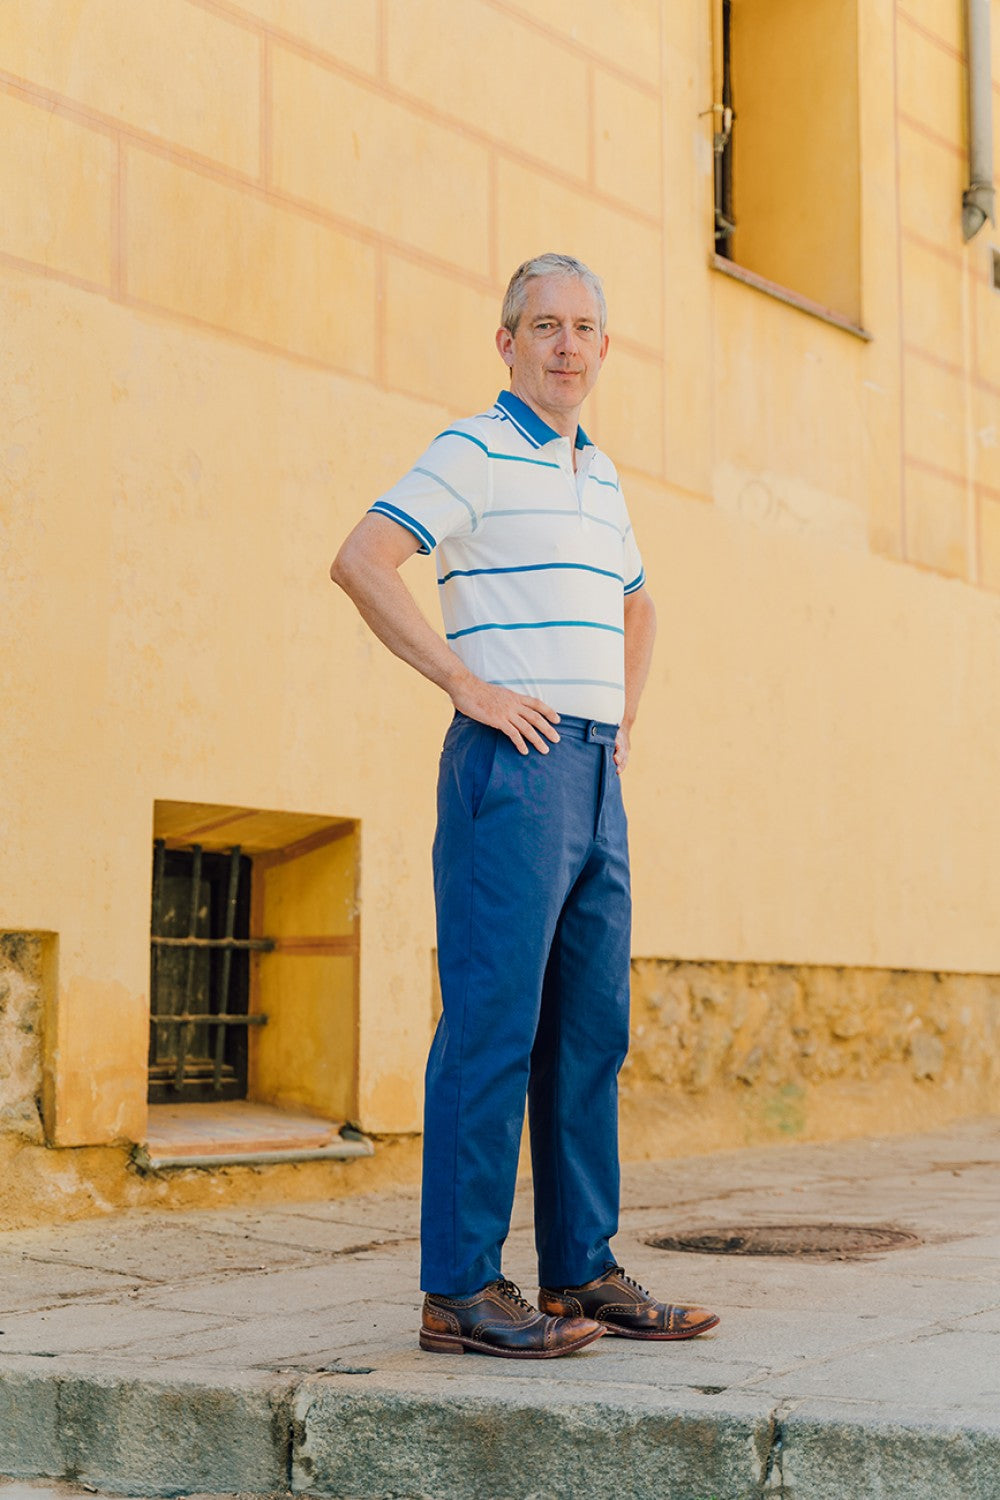 Liesl + Co - Alvalade Men's Trousers Sewing Pattern